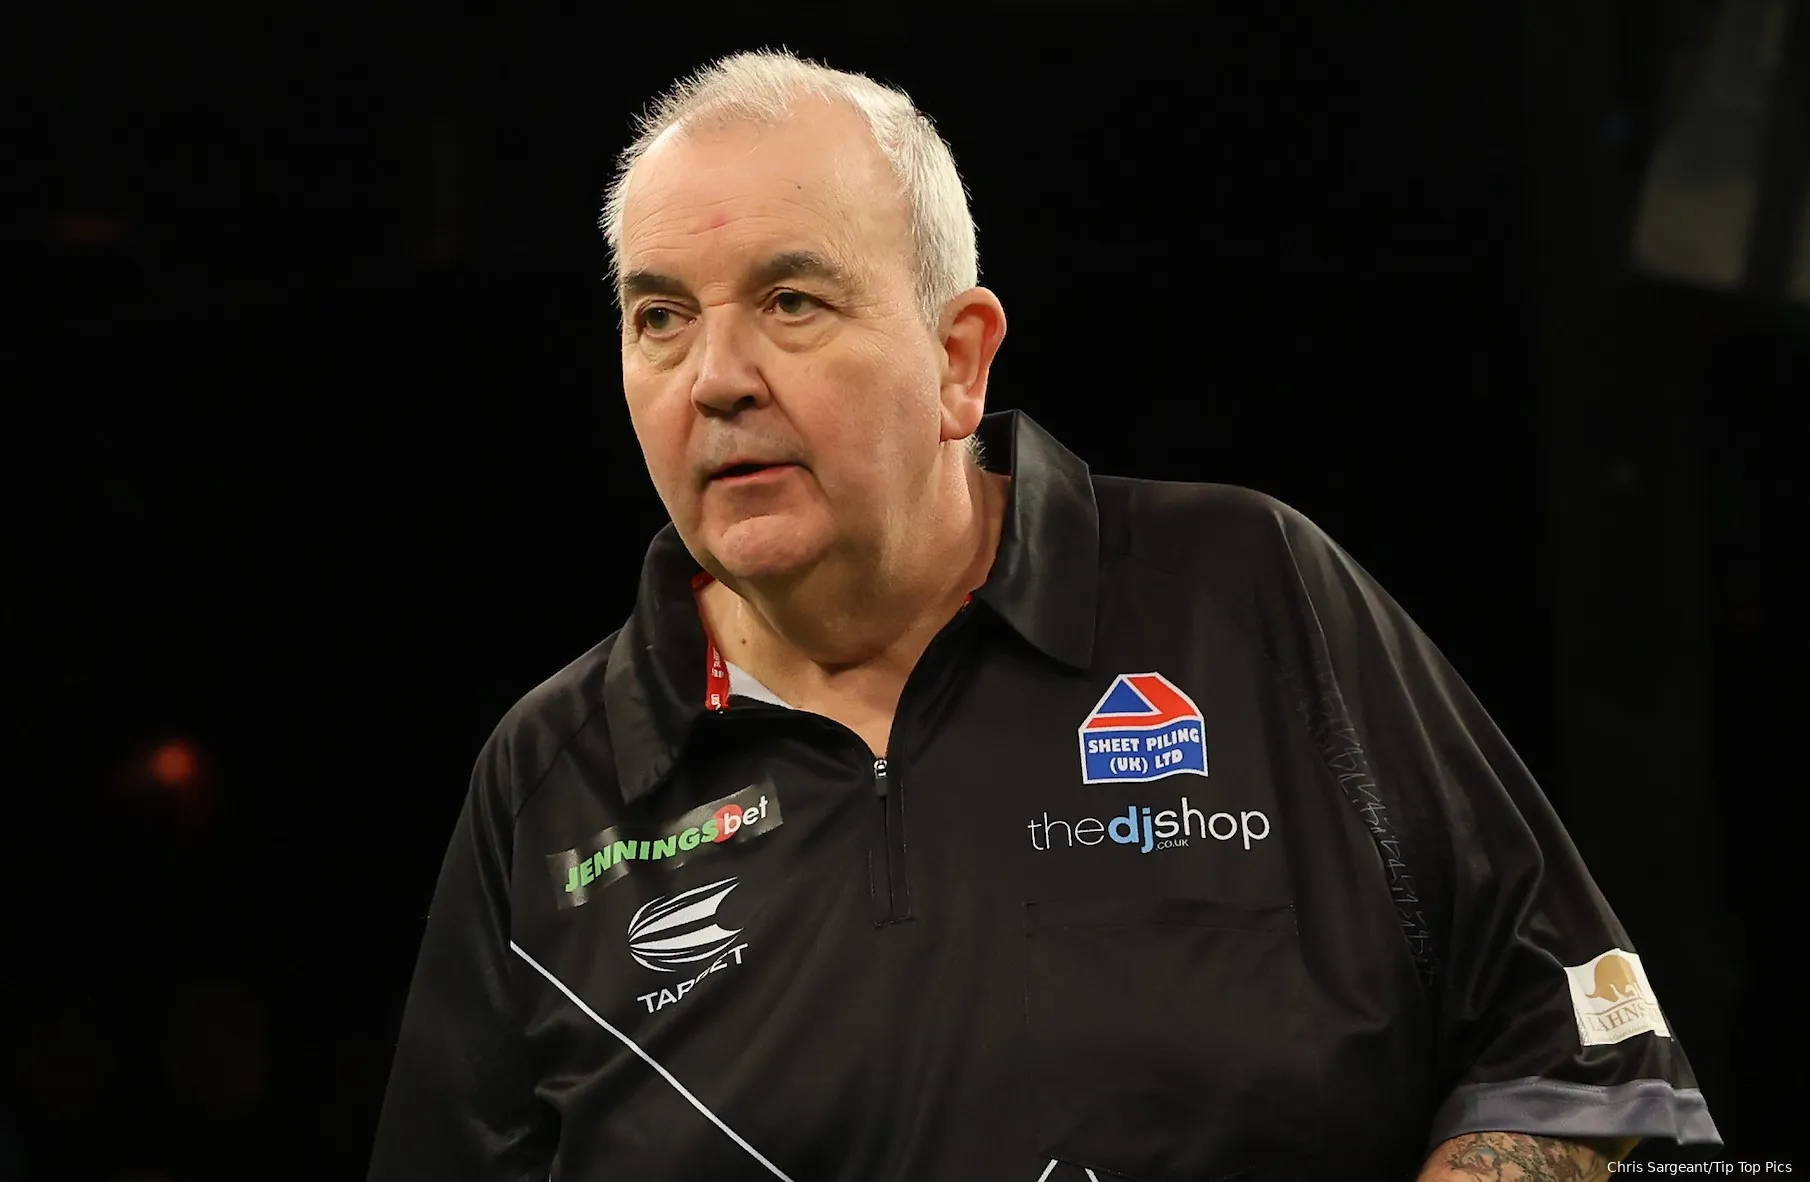 phil taylor wsdtwc20232332 63e833523a7bb